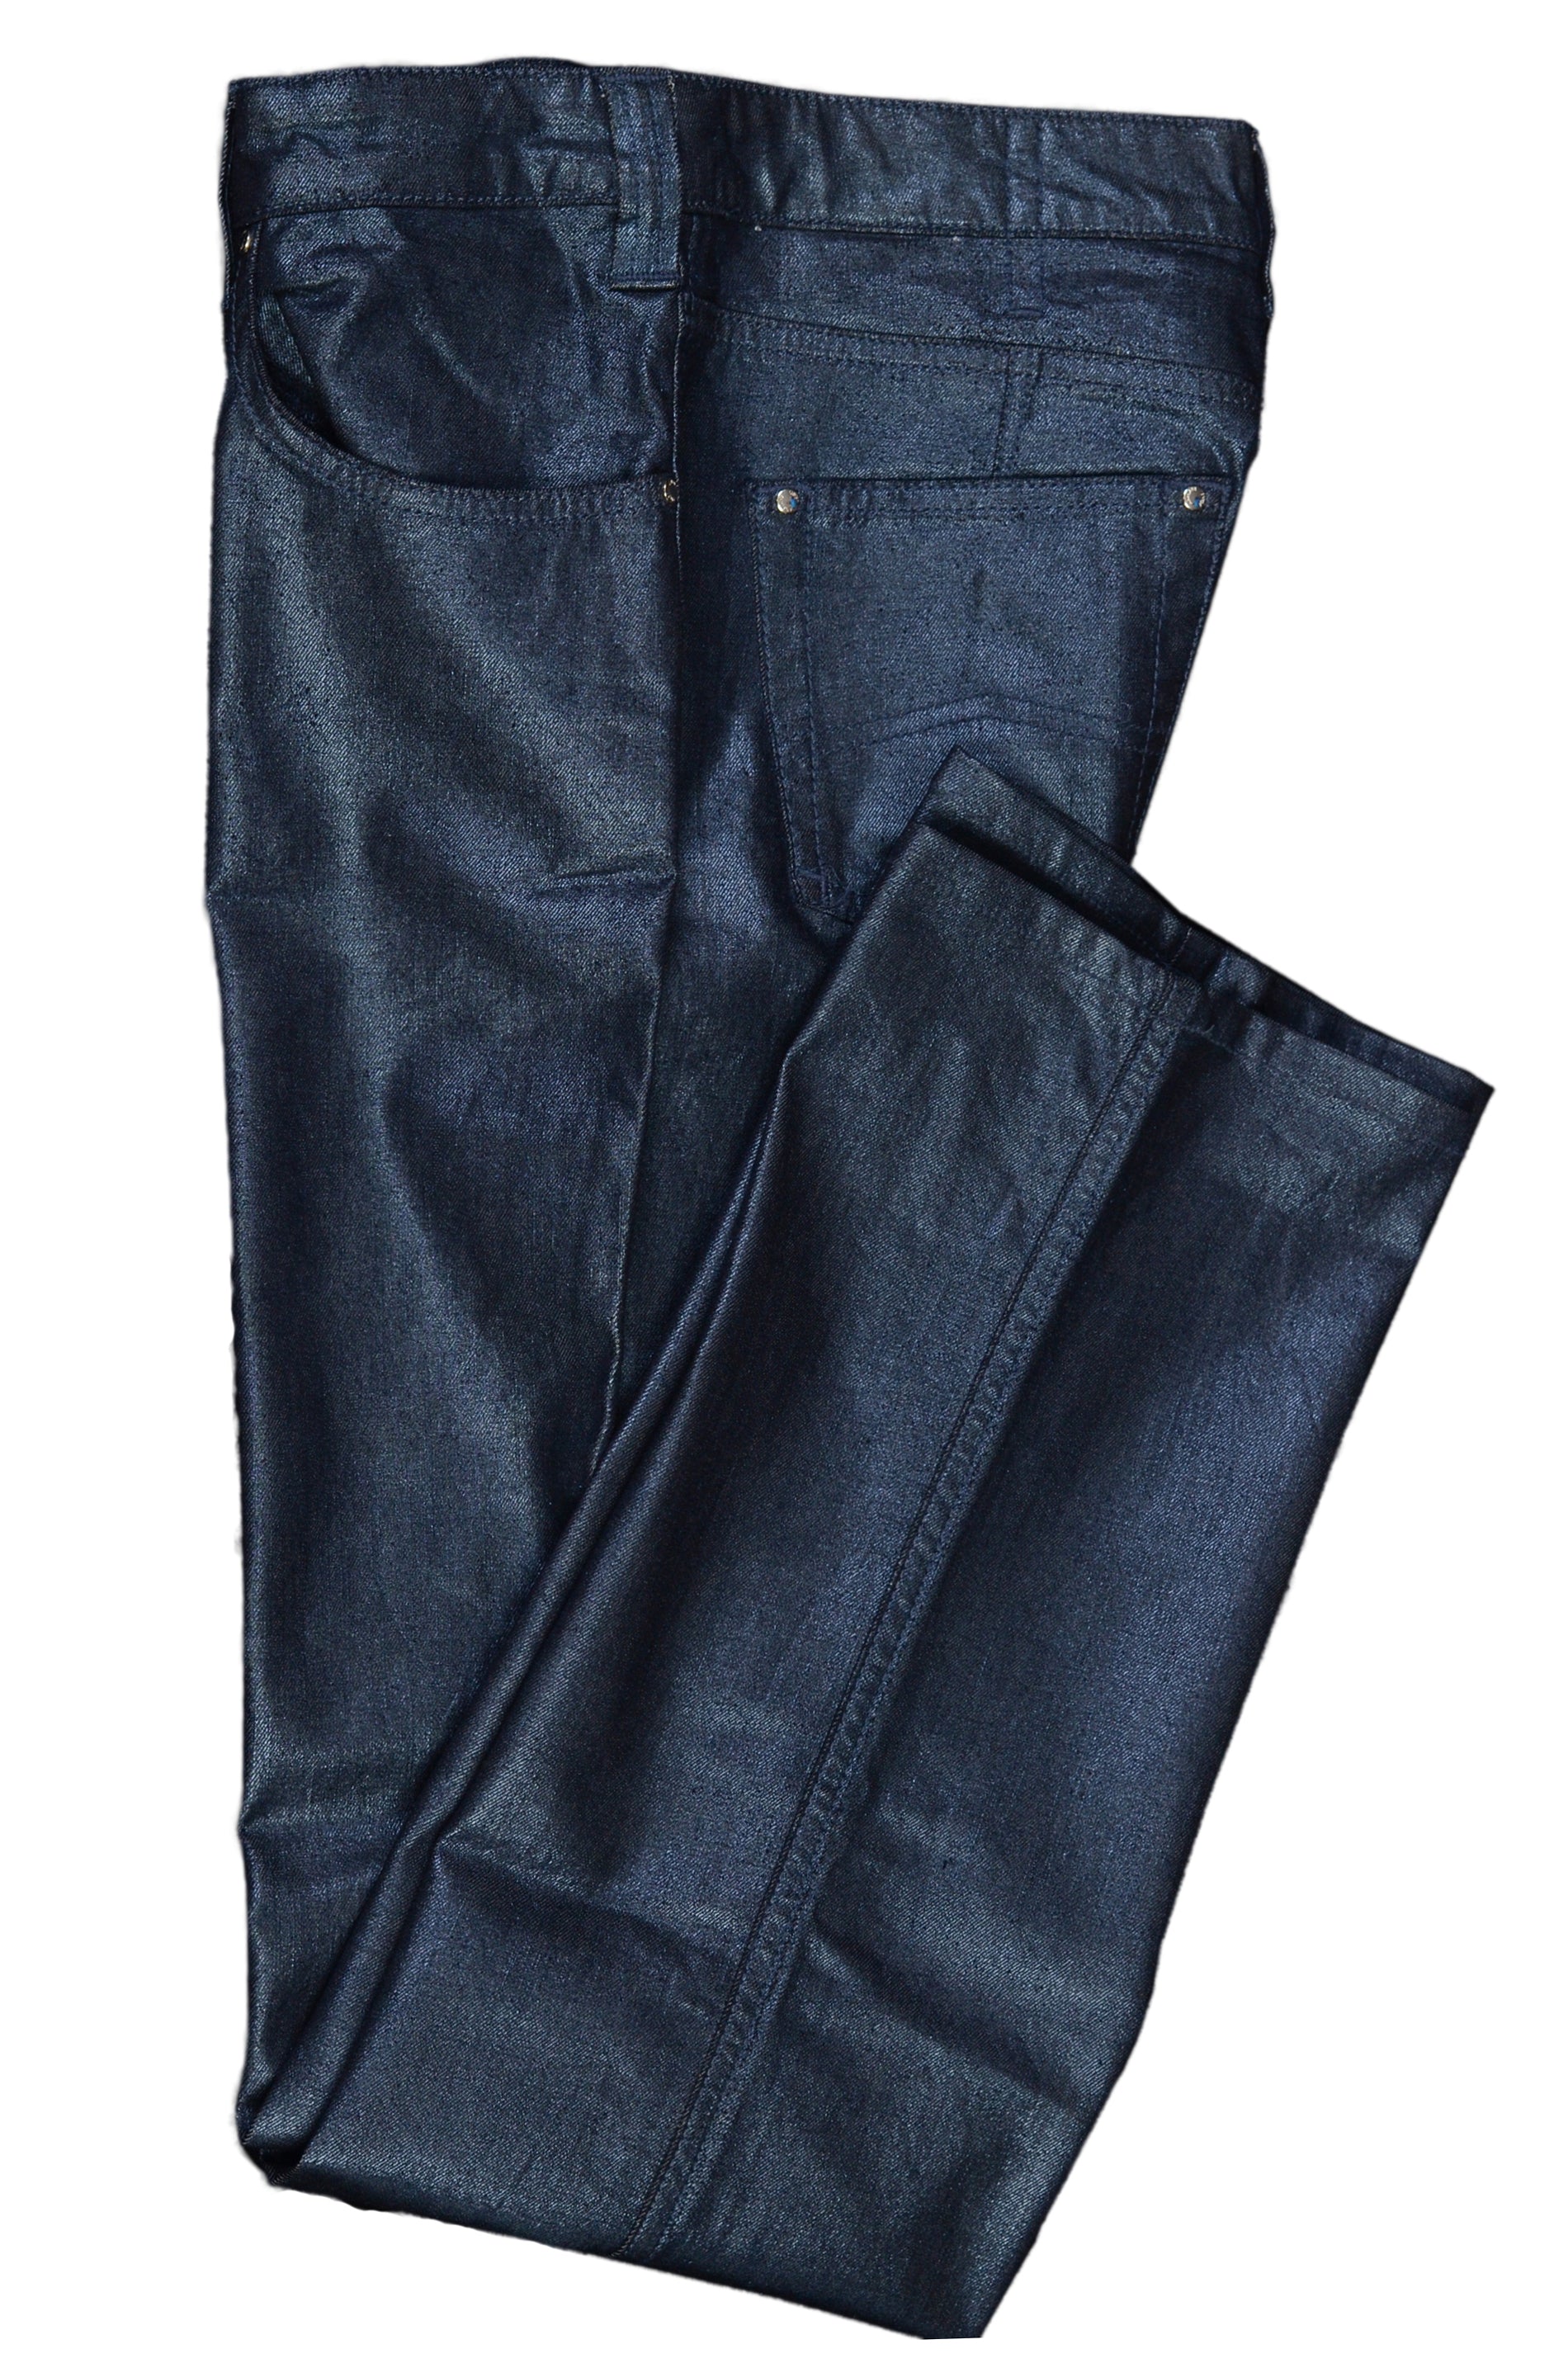 Drink water middag twintig AJ ARMANI JEANS Blue Cotton Stretch Jeans Pants NEW US 29 – SARTORIALE